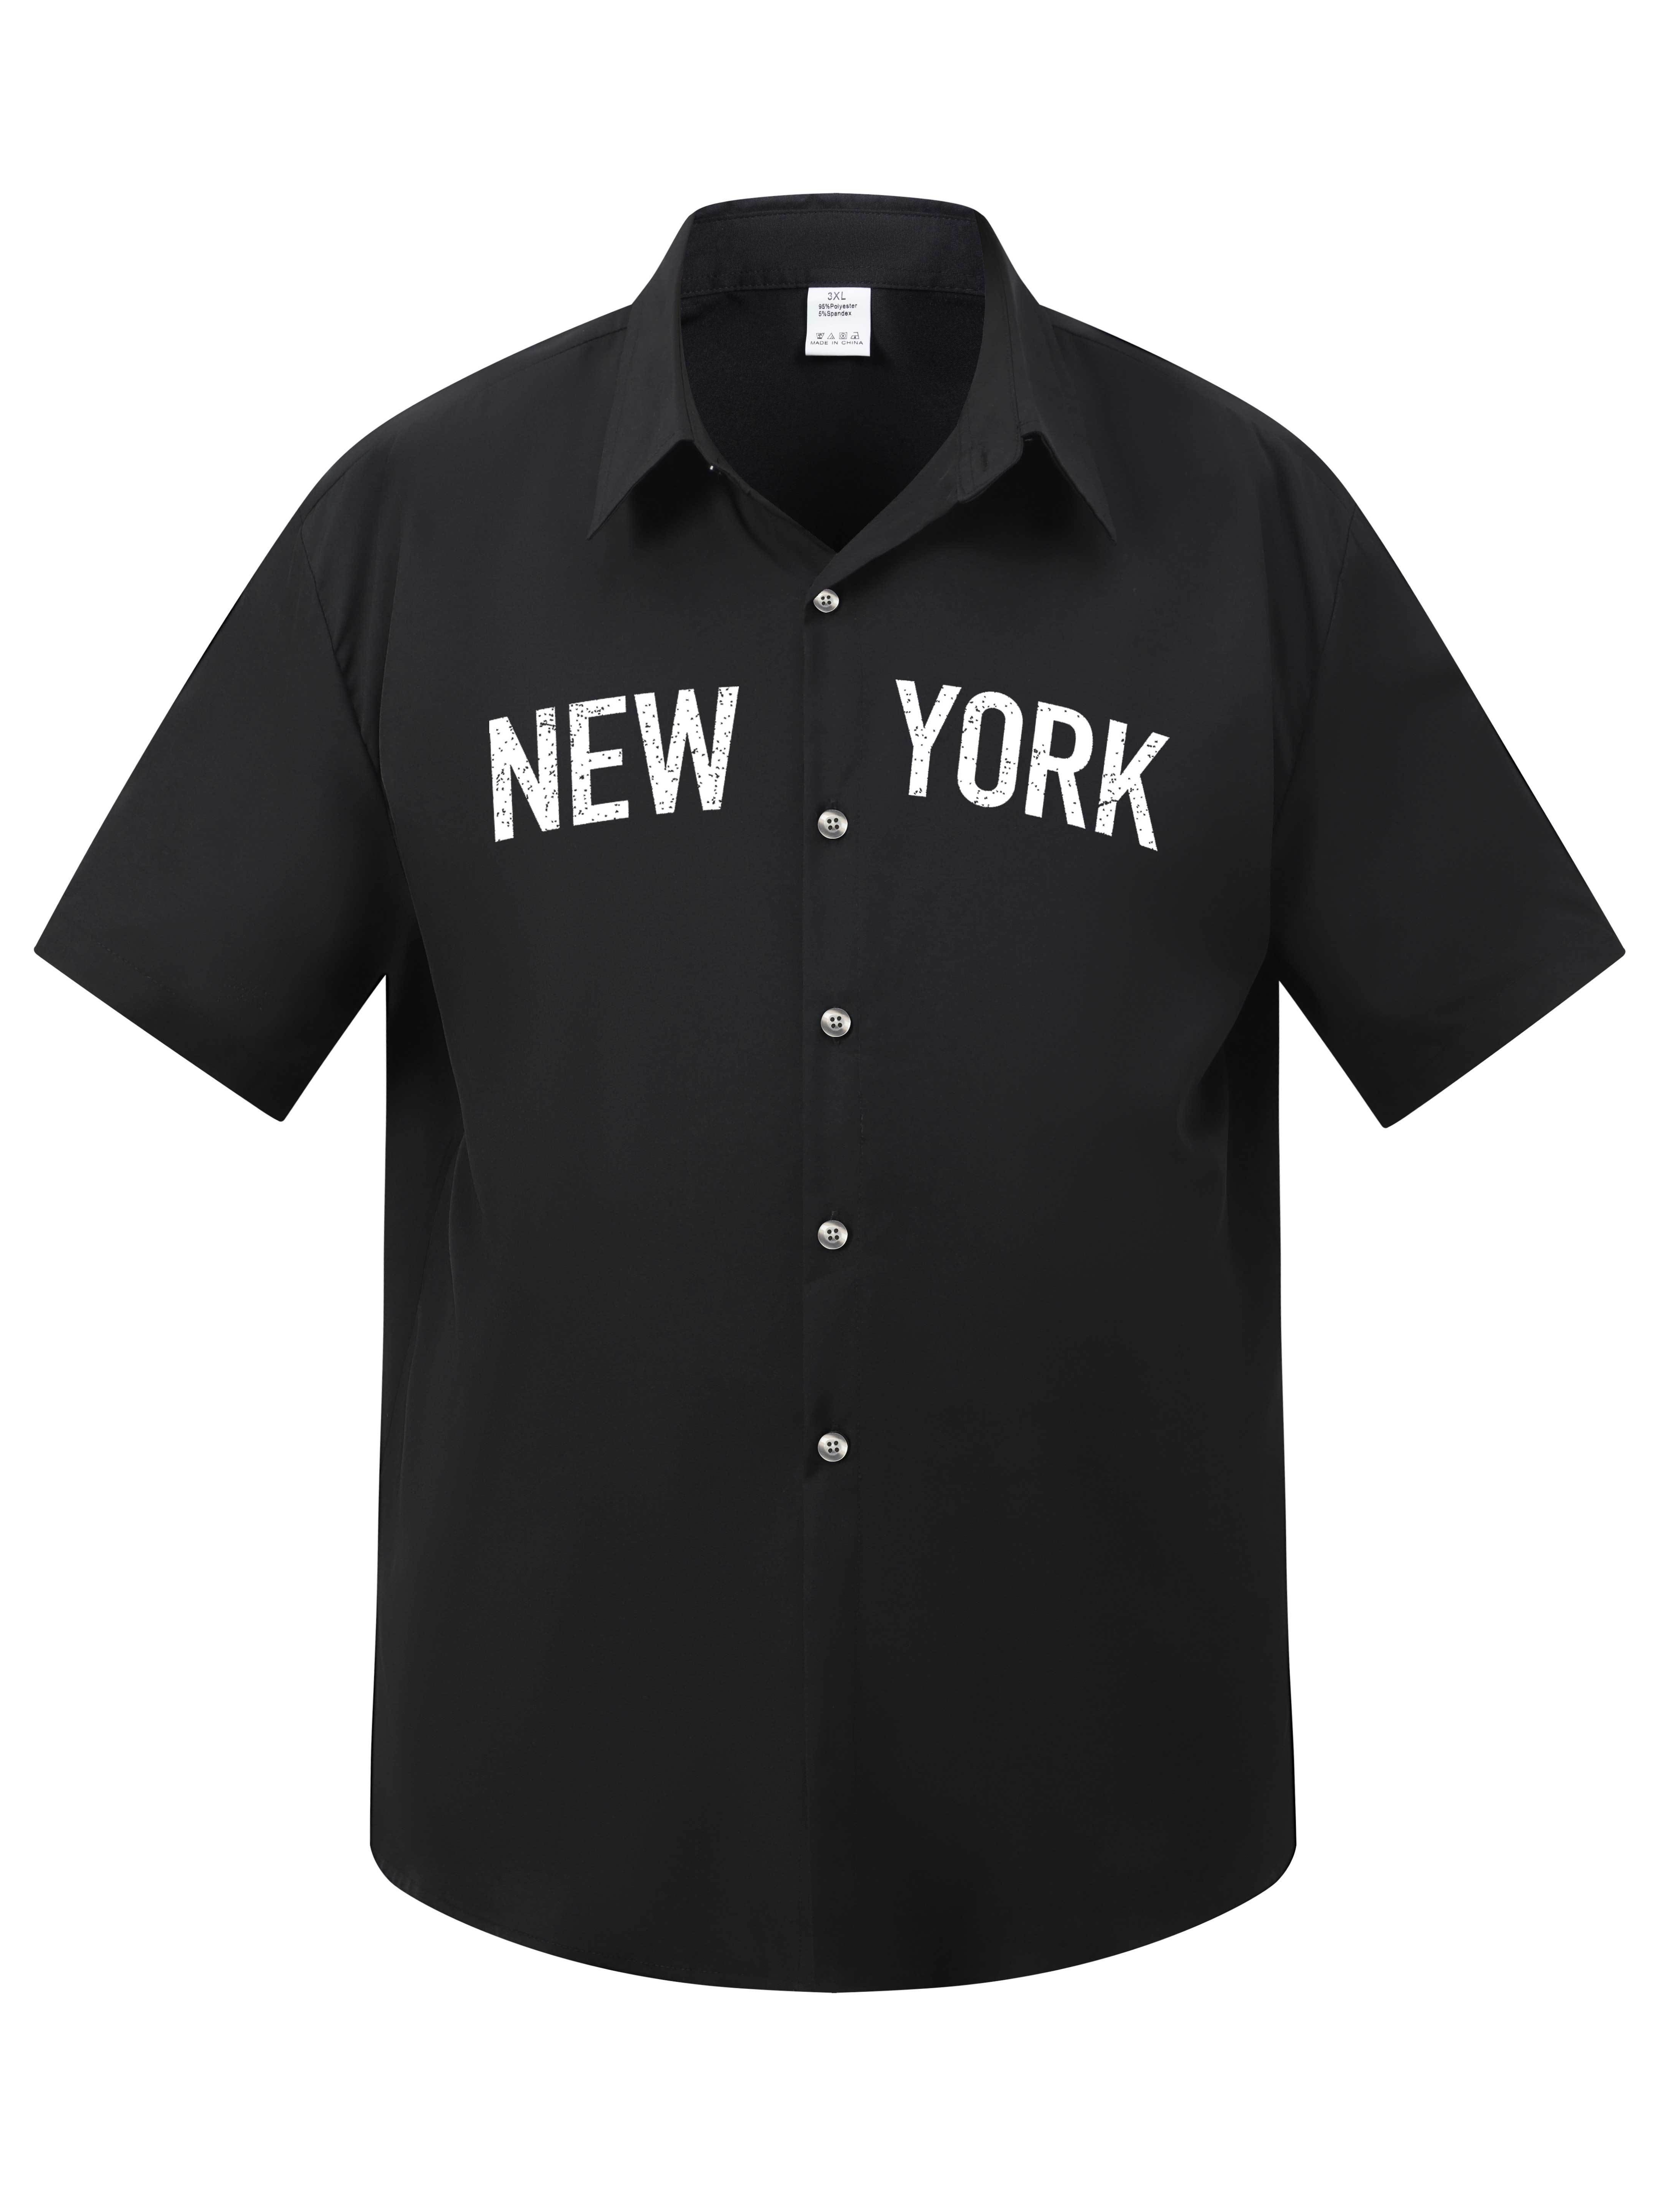 Plus Size Mens Casual New York Pattern Work Shirts Button Short